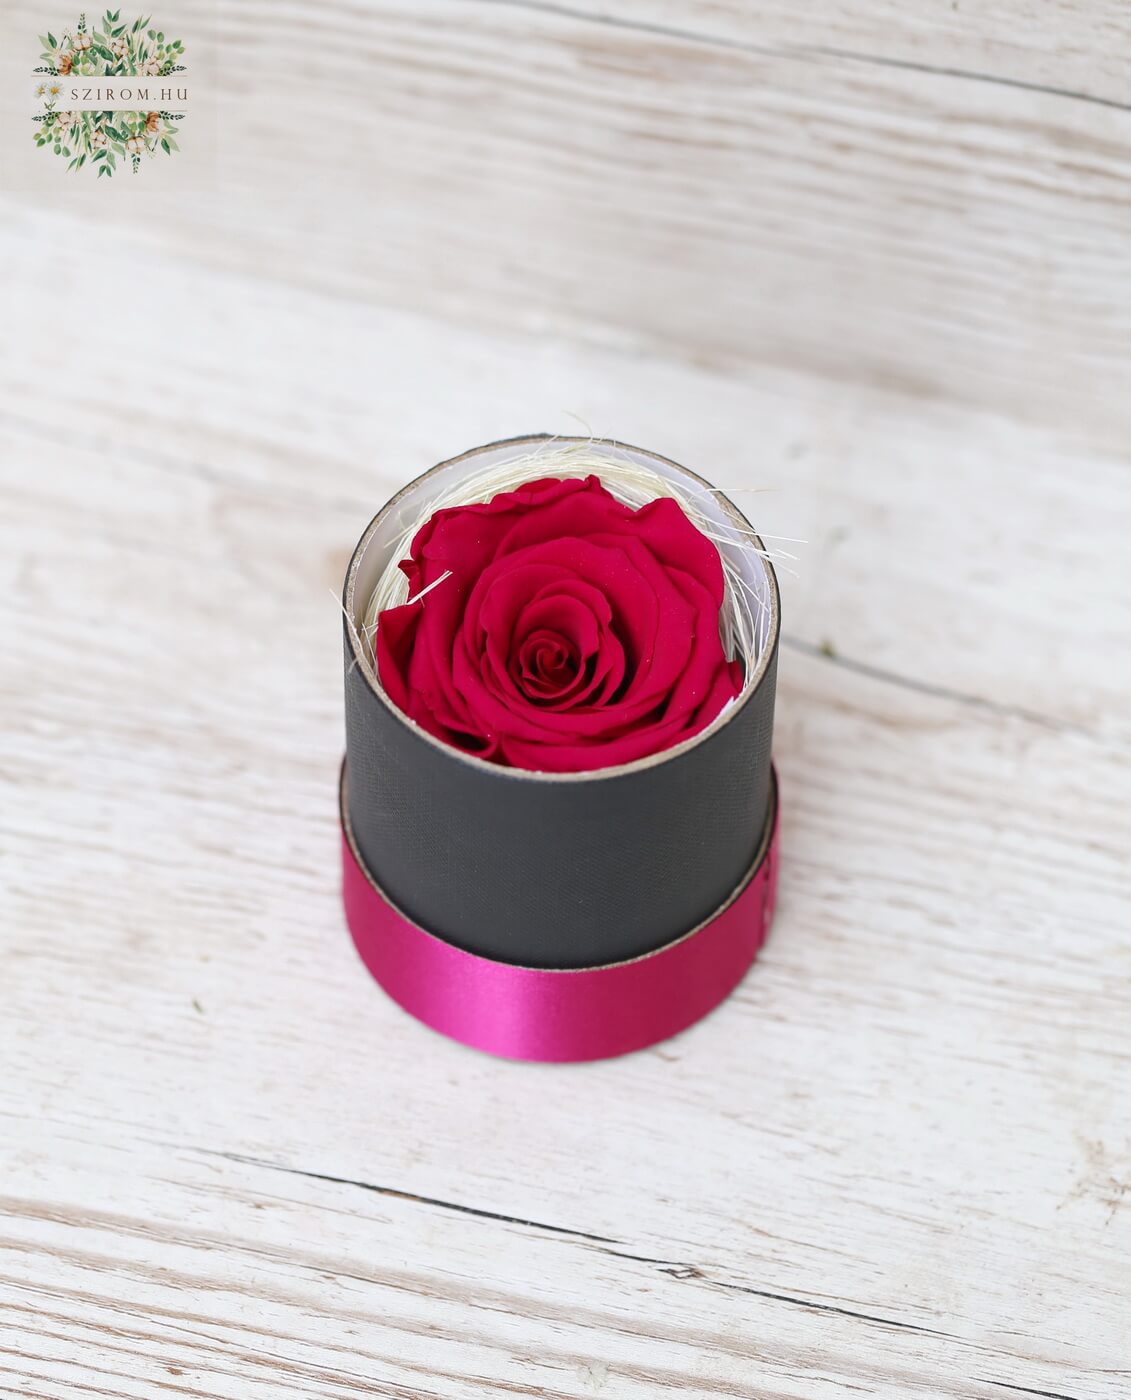 flower delivery Budapest - Forever rose 1 stem in small box